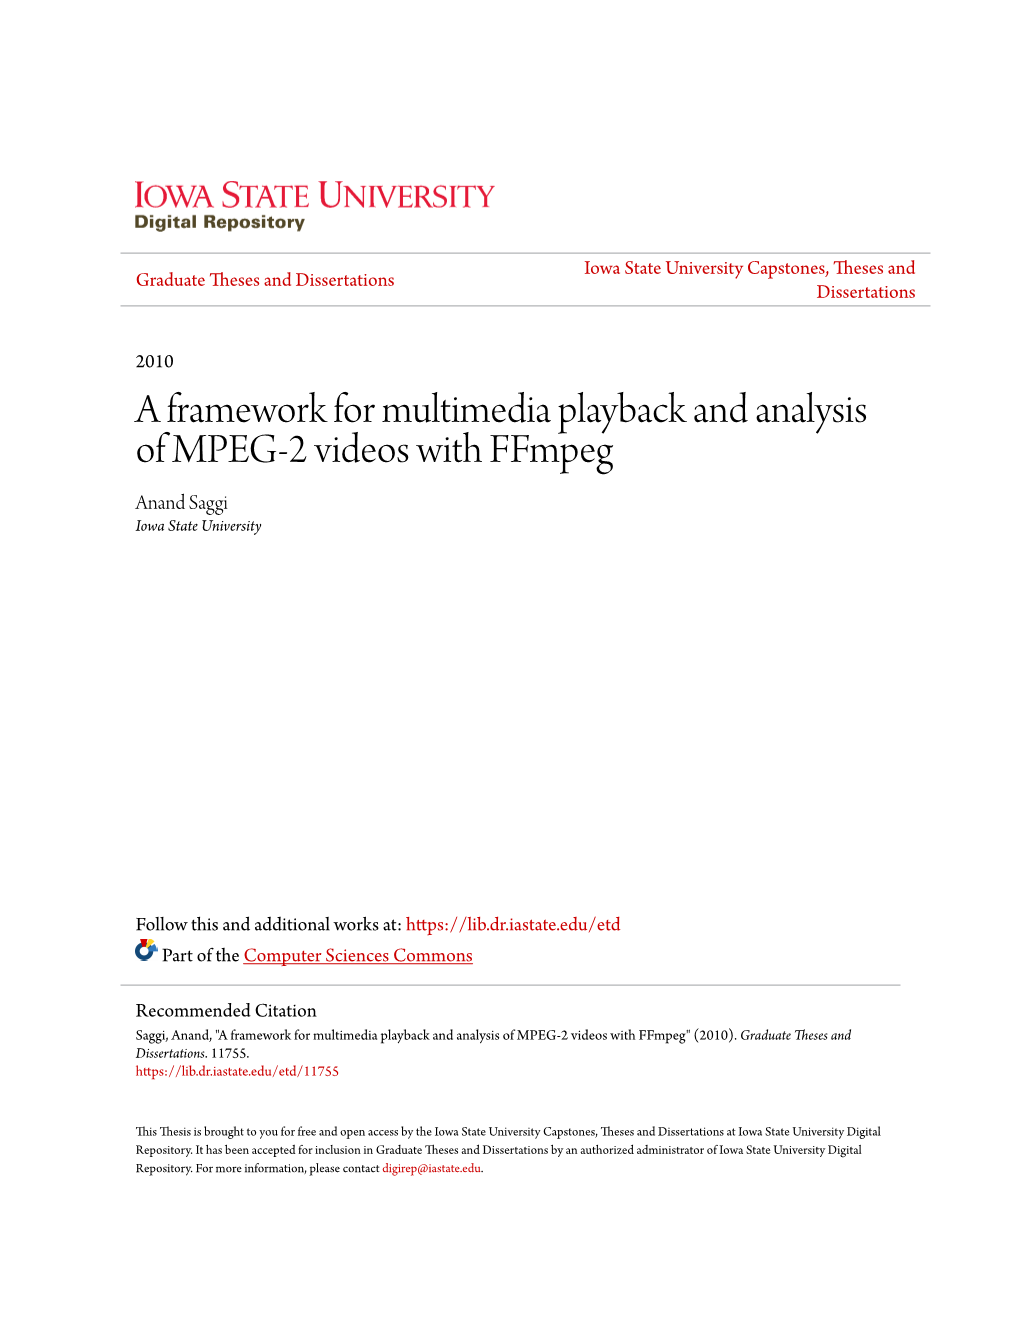 A Framework for Multimedia Playback and Analysis of MPEG-2 Videos with Ffmpeg Anand Saggi Iowa State University